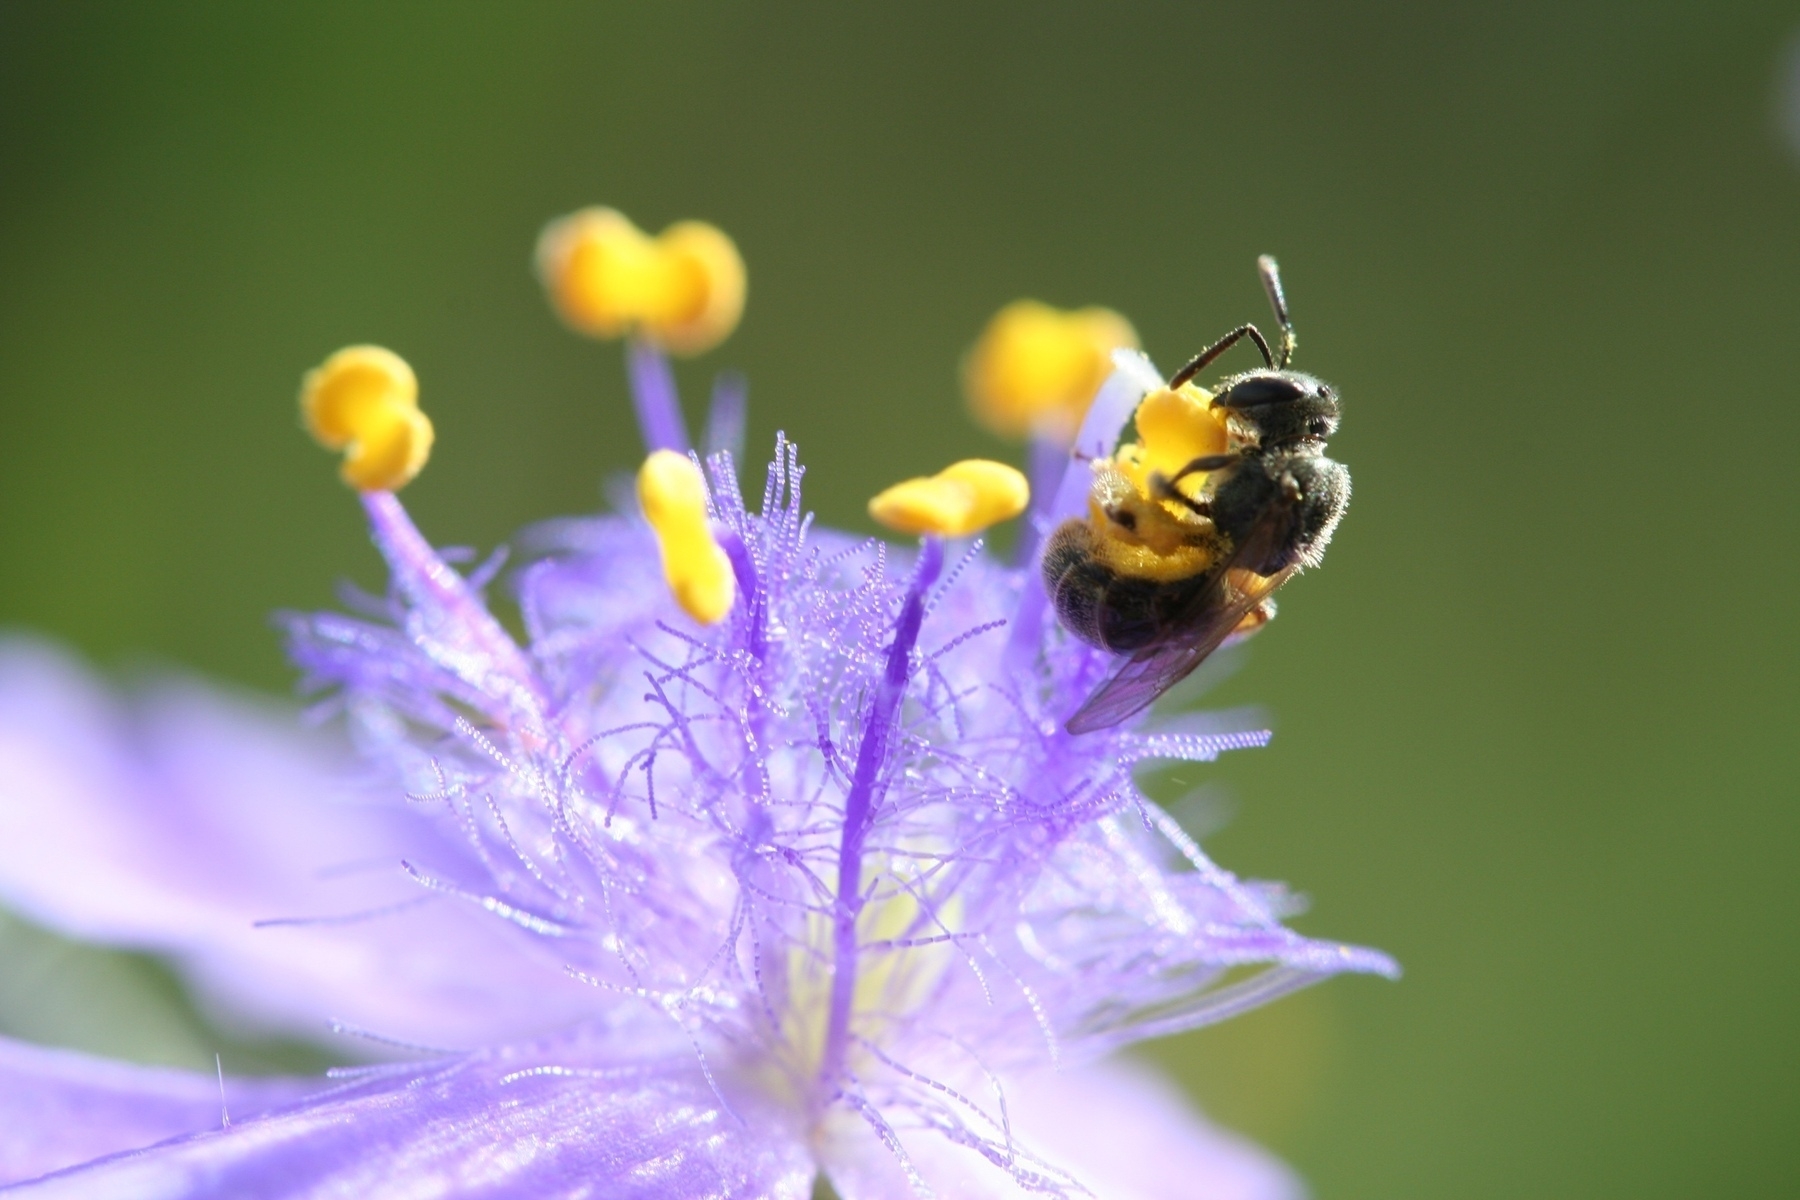 A small bee gathering pollen from the bright yellow anthers of a vibrant purple Spiderwort flower.